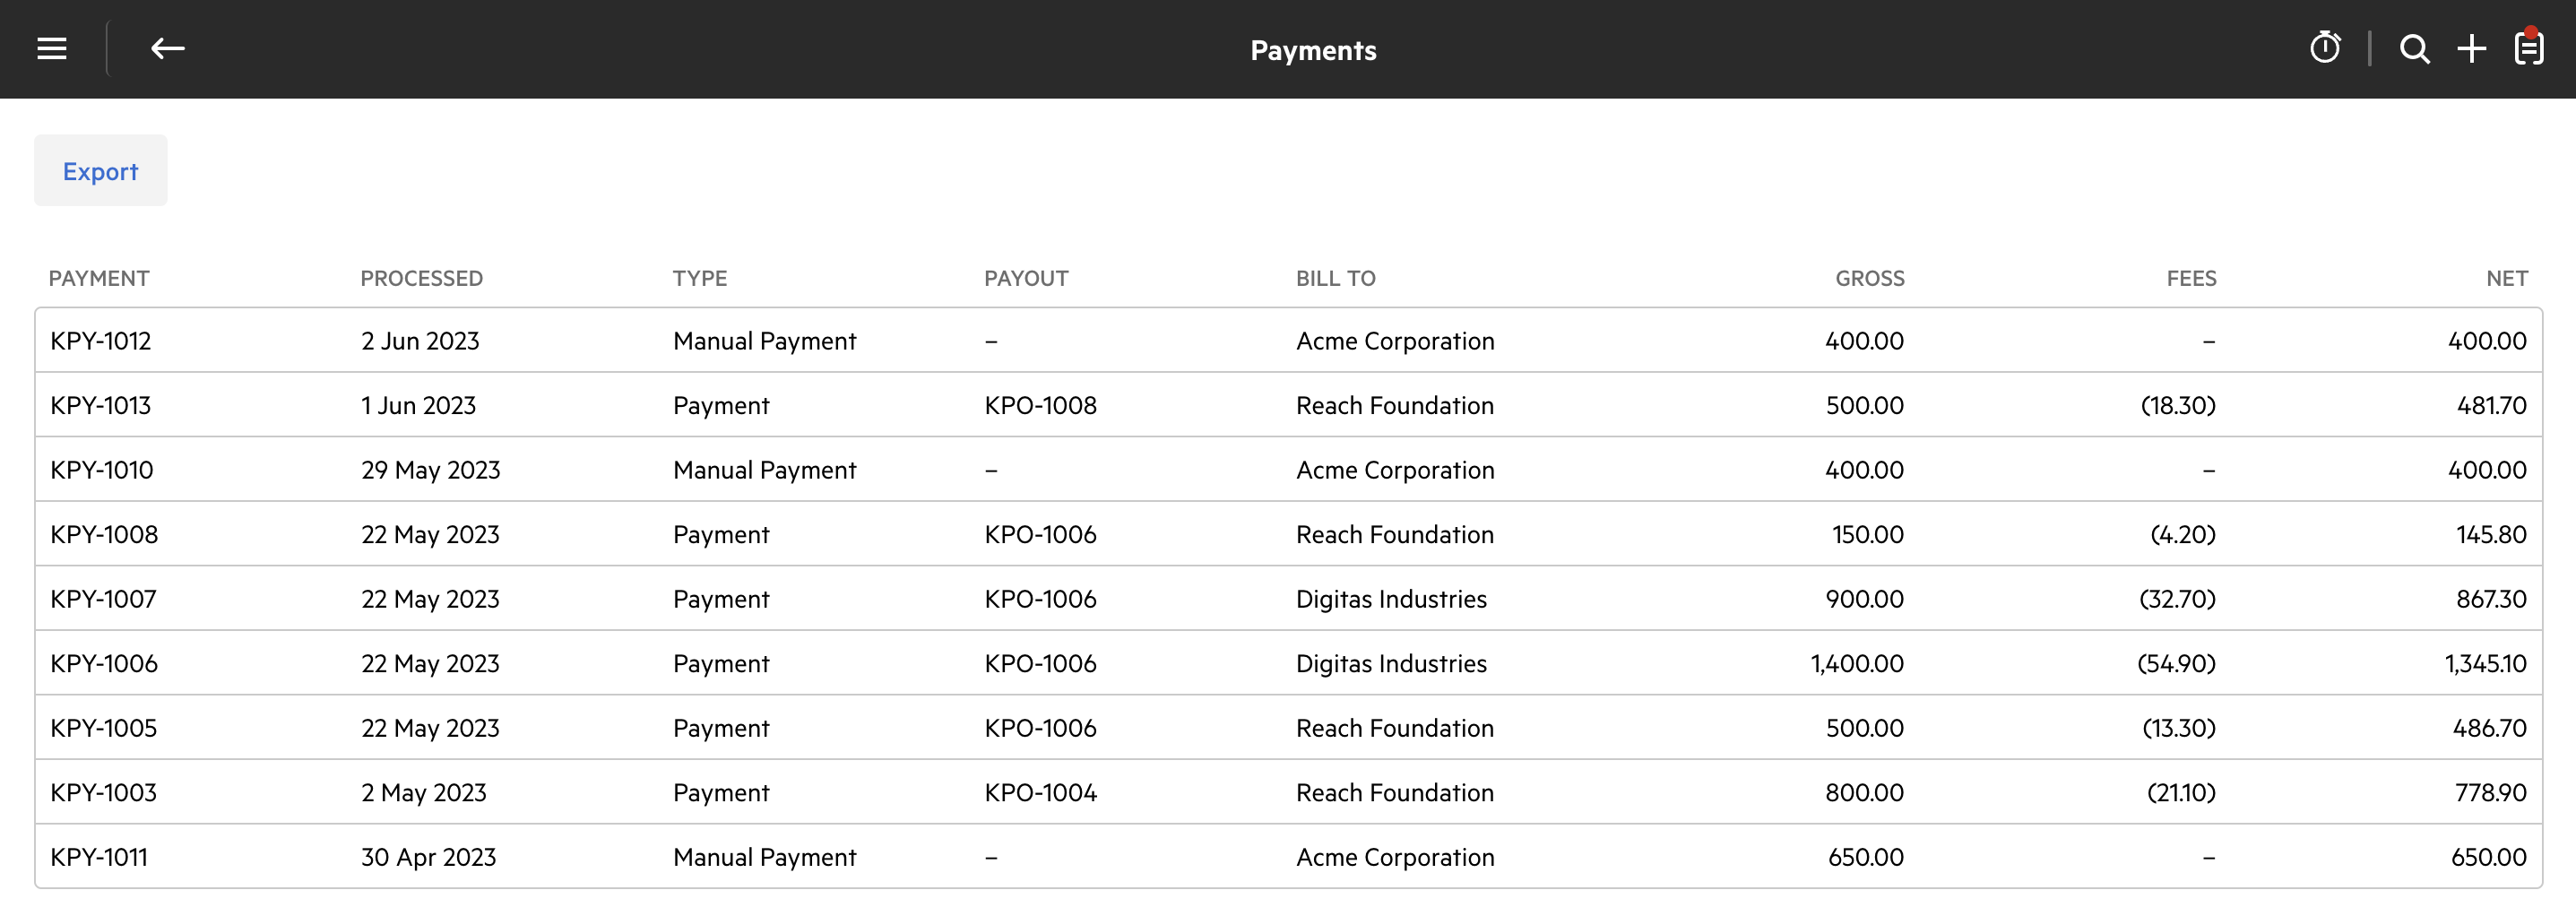 Payments Report